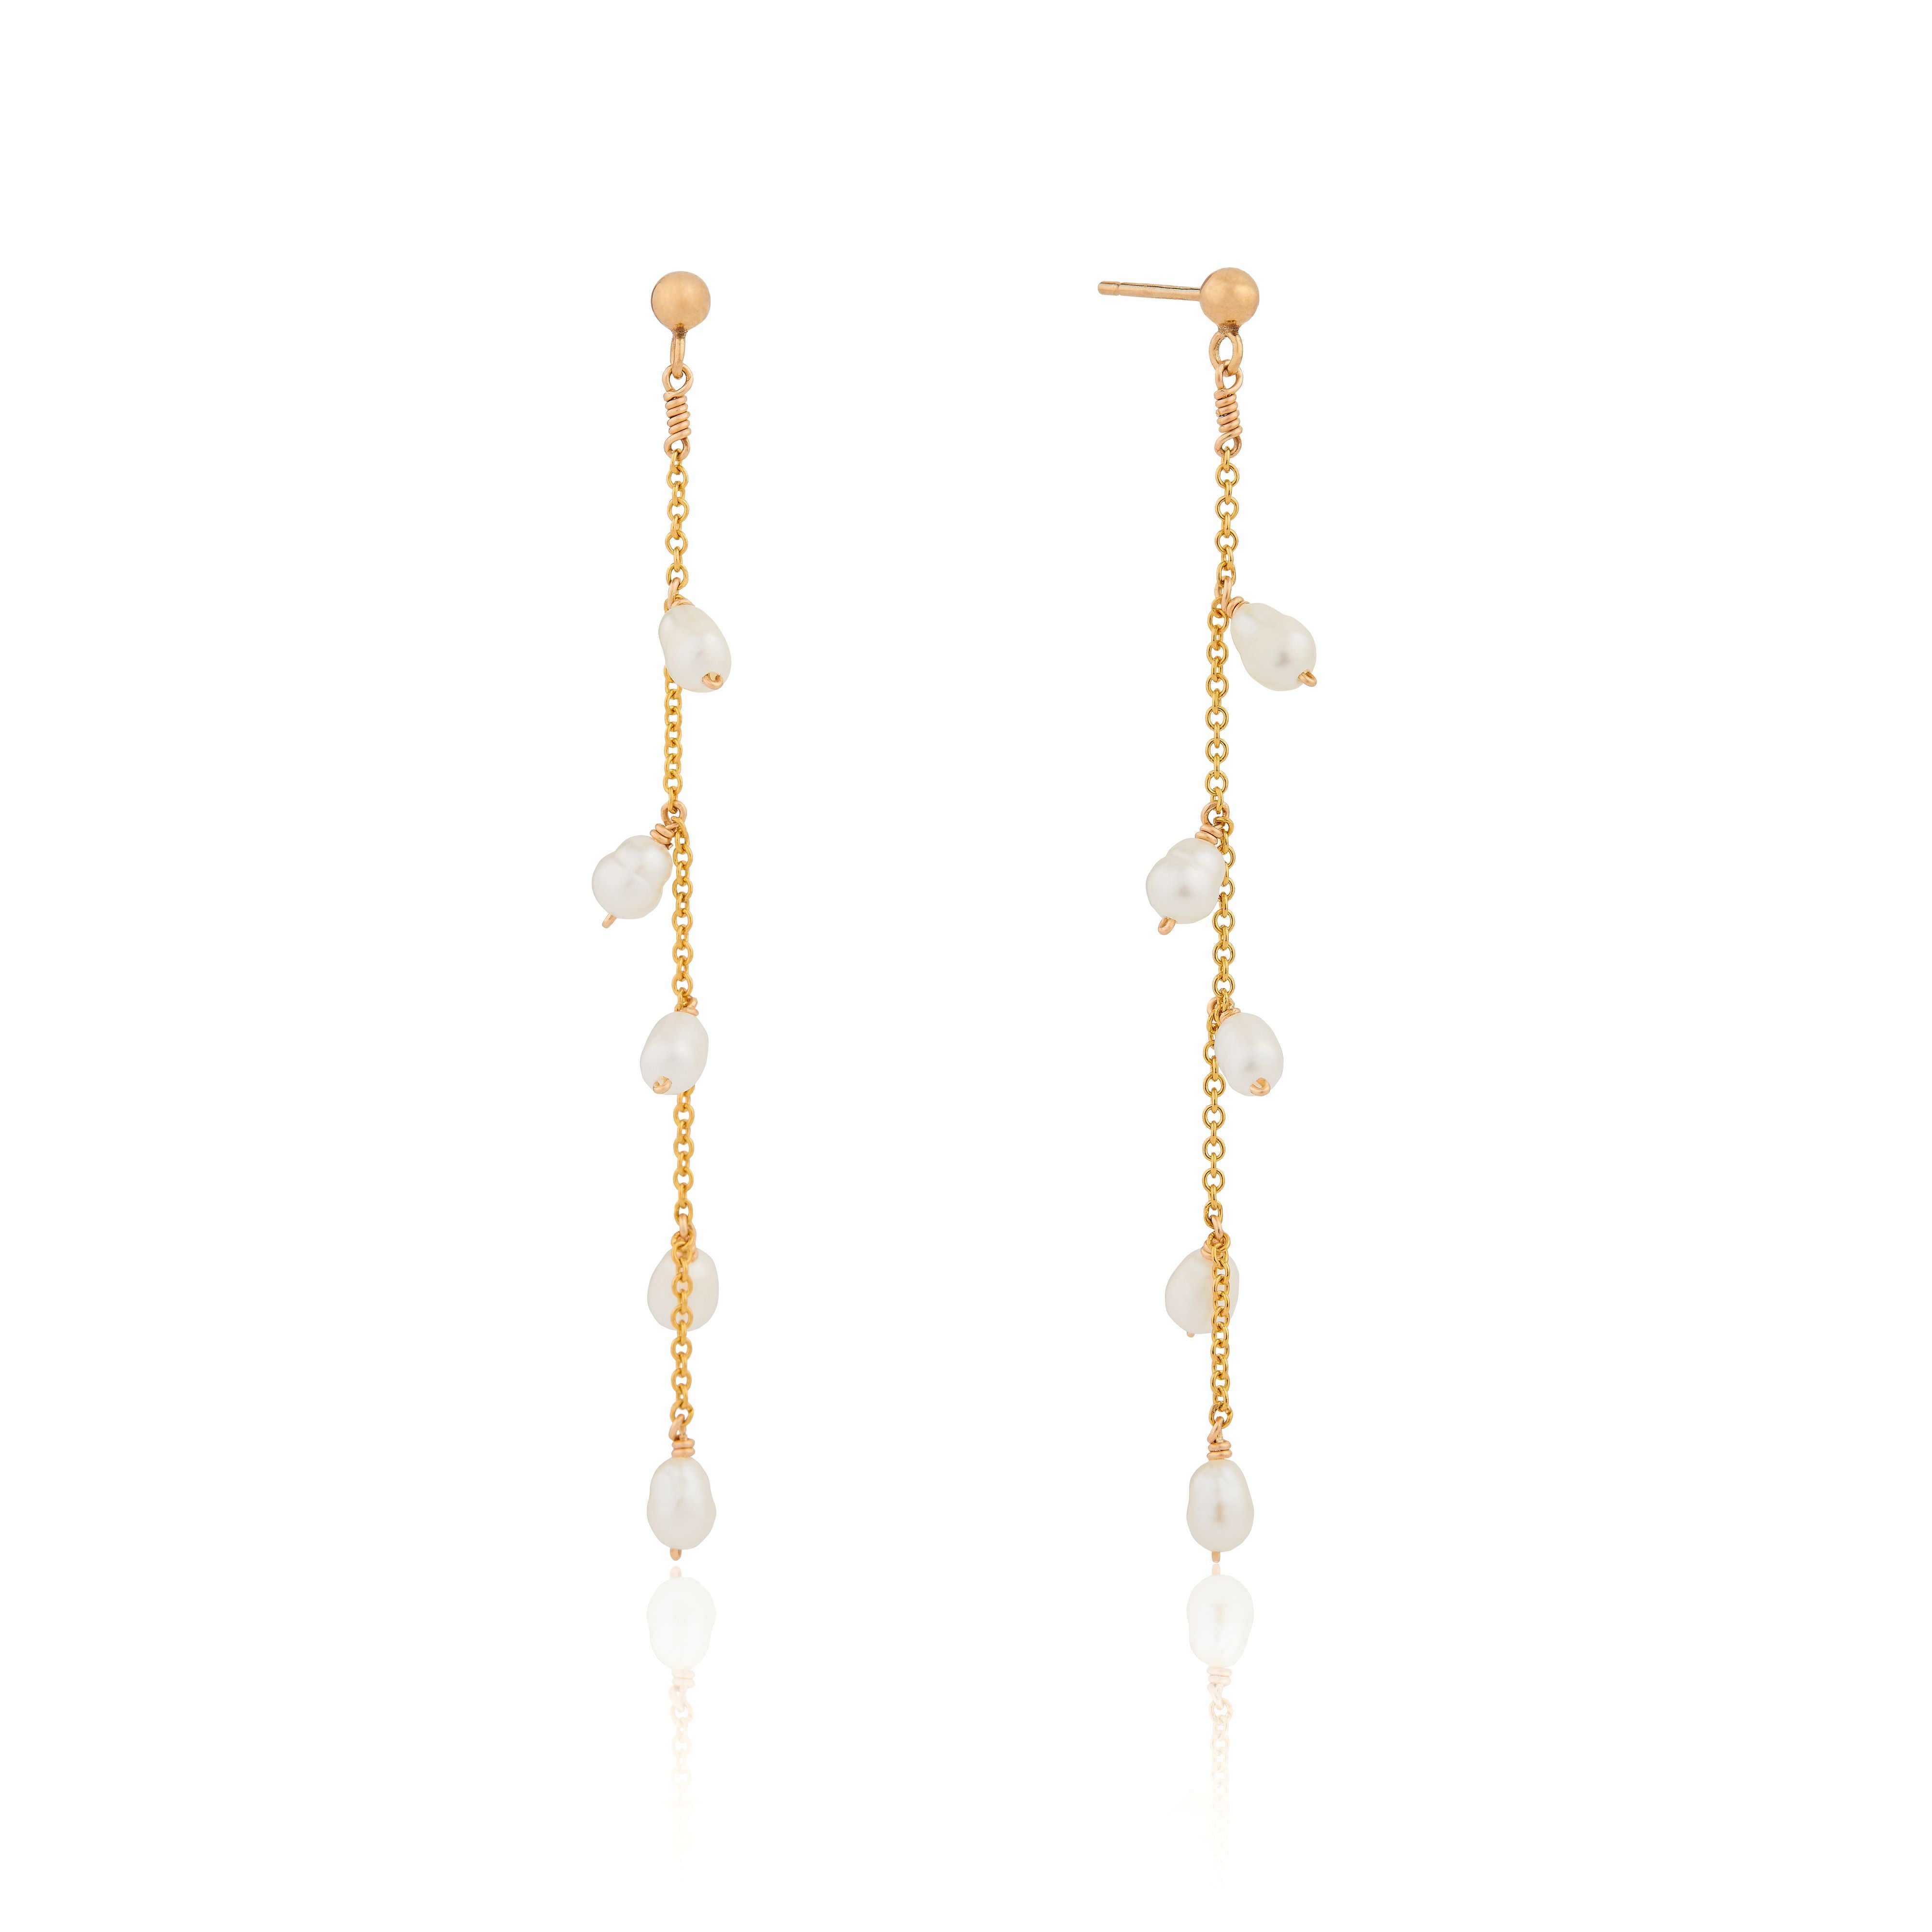 Gold seed pearl drop earrings on a white background